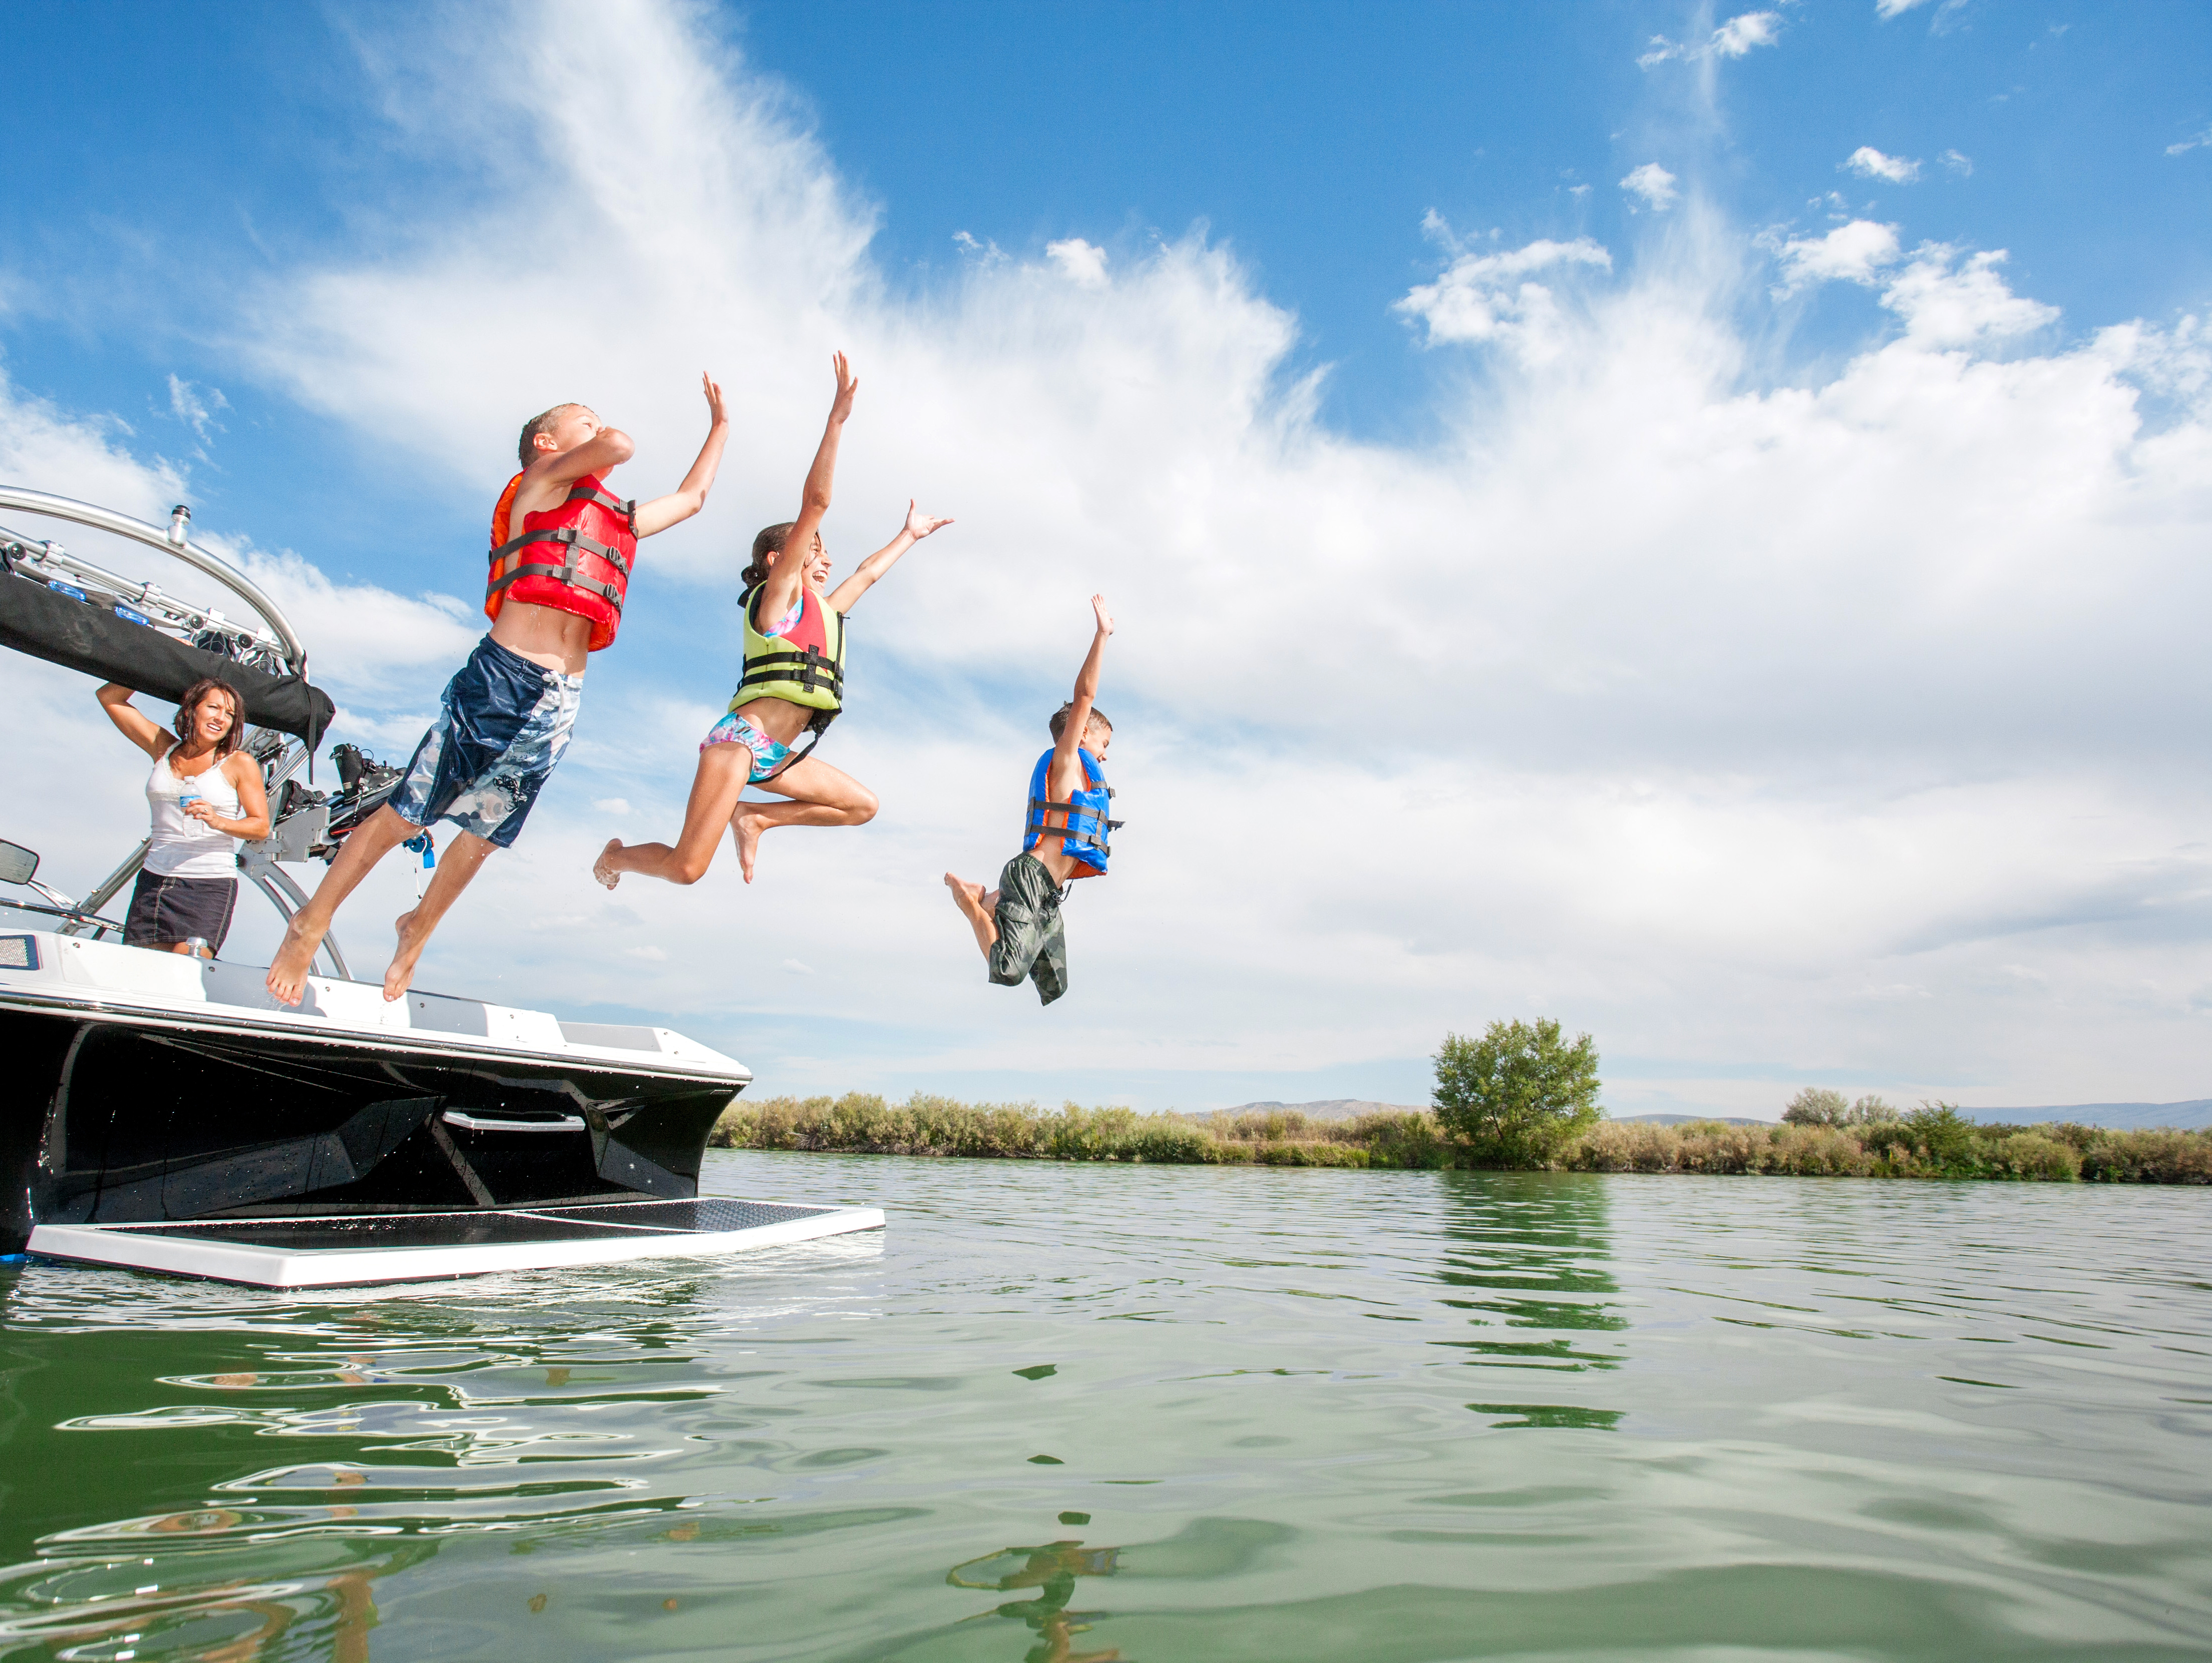 People wearing life jackets jumping into the water from a boat, safe boating course concept. 